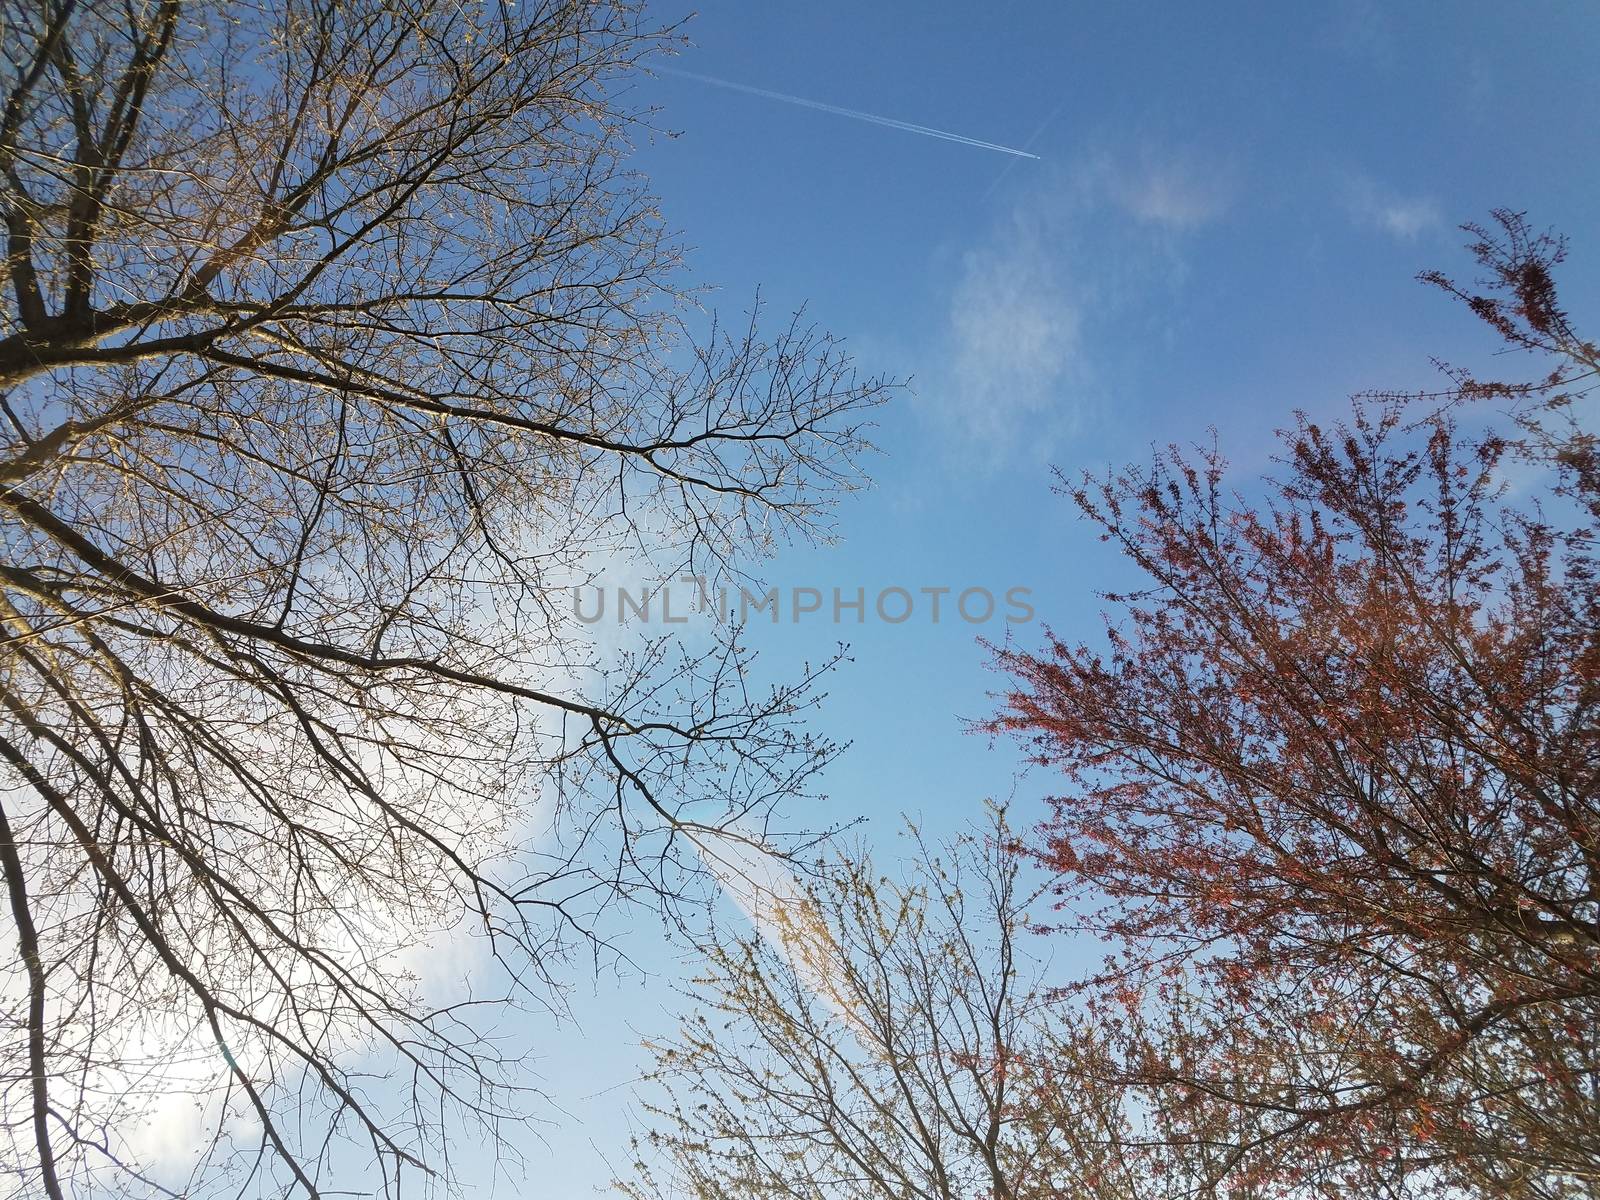 trees, clouds, and blue sky with plane or airplane and contrail